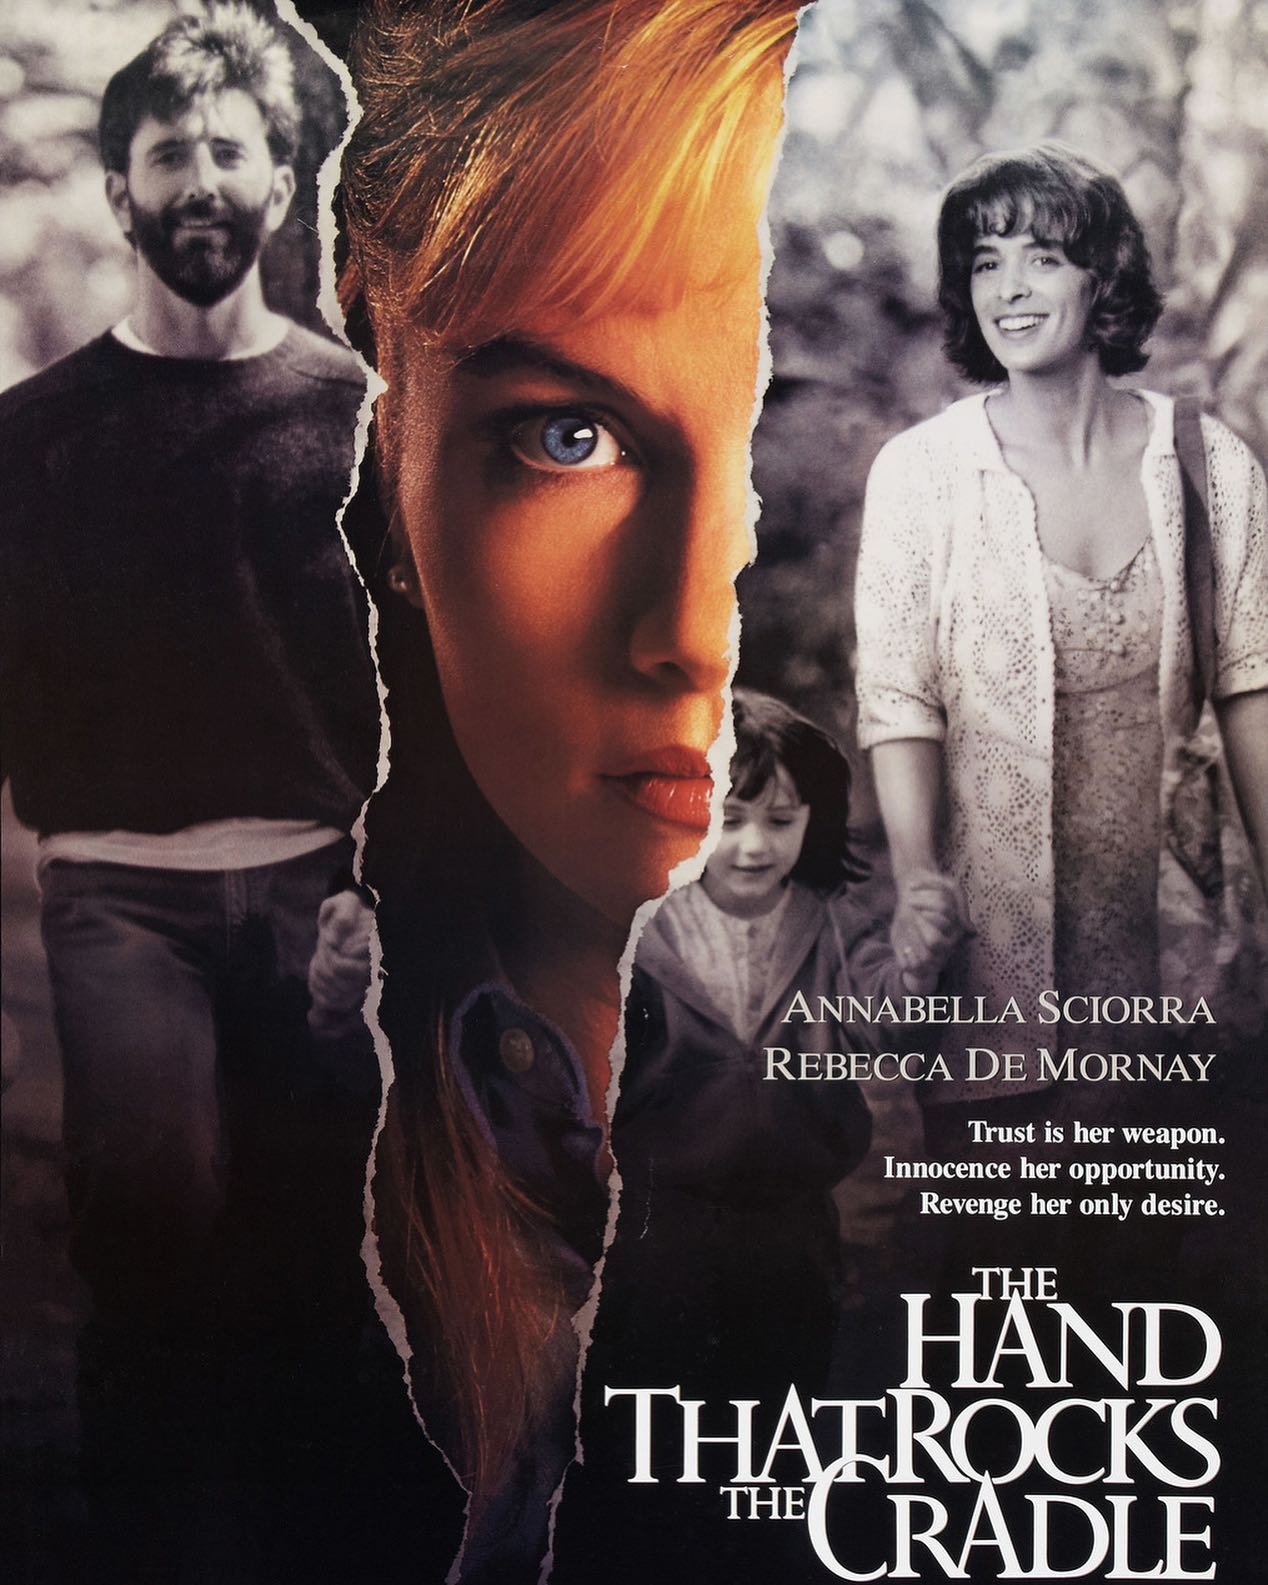 30 years ago today, ‘The Hand That Rocks The Cradle’ hit theaters! 

Directed by Curtis Hanson, the films stars Annabella Sciorra, Rebecca De Mornay, Matt McCoy, Ernie Hudson, and Julianne Moore. The film centers around q young live-in nanny who wants the perfect life and family of her employer – the woman that she holds responsible for her husband’s suicide – and she will stop at nothing to get it.

#TheHandThatRocksTheCradle #AnnabellaSciorra #RebeccaDeMornay #thrillers #movies #film #30thanniversary